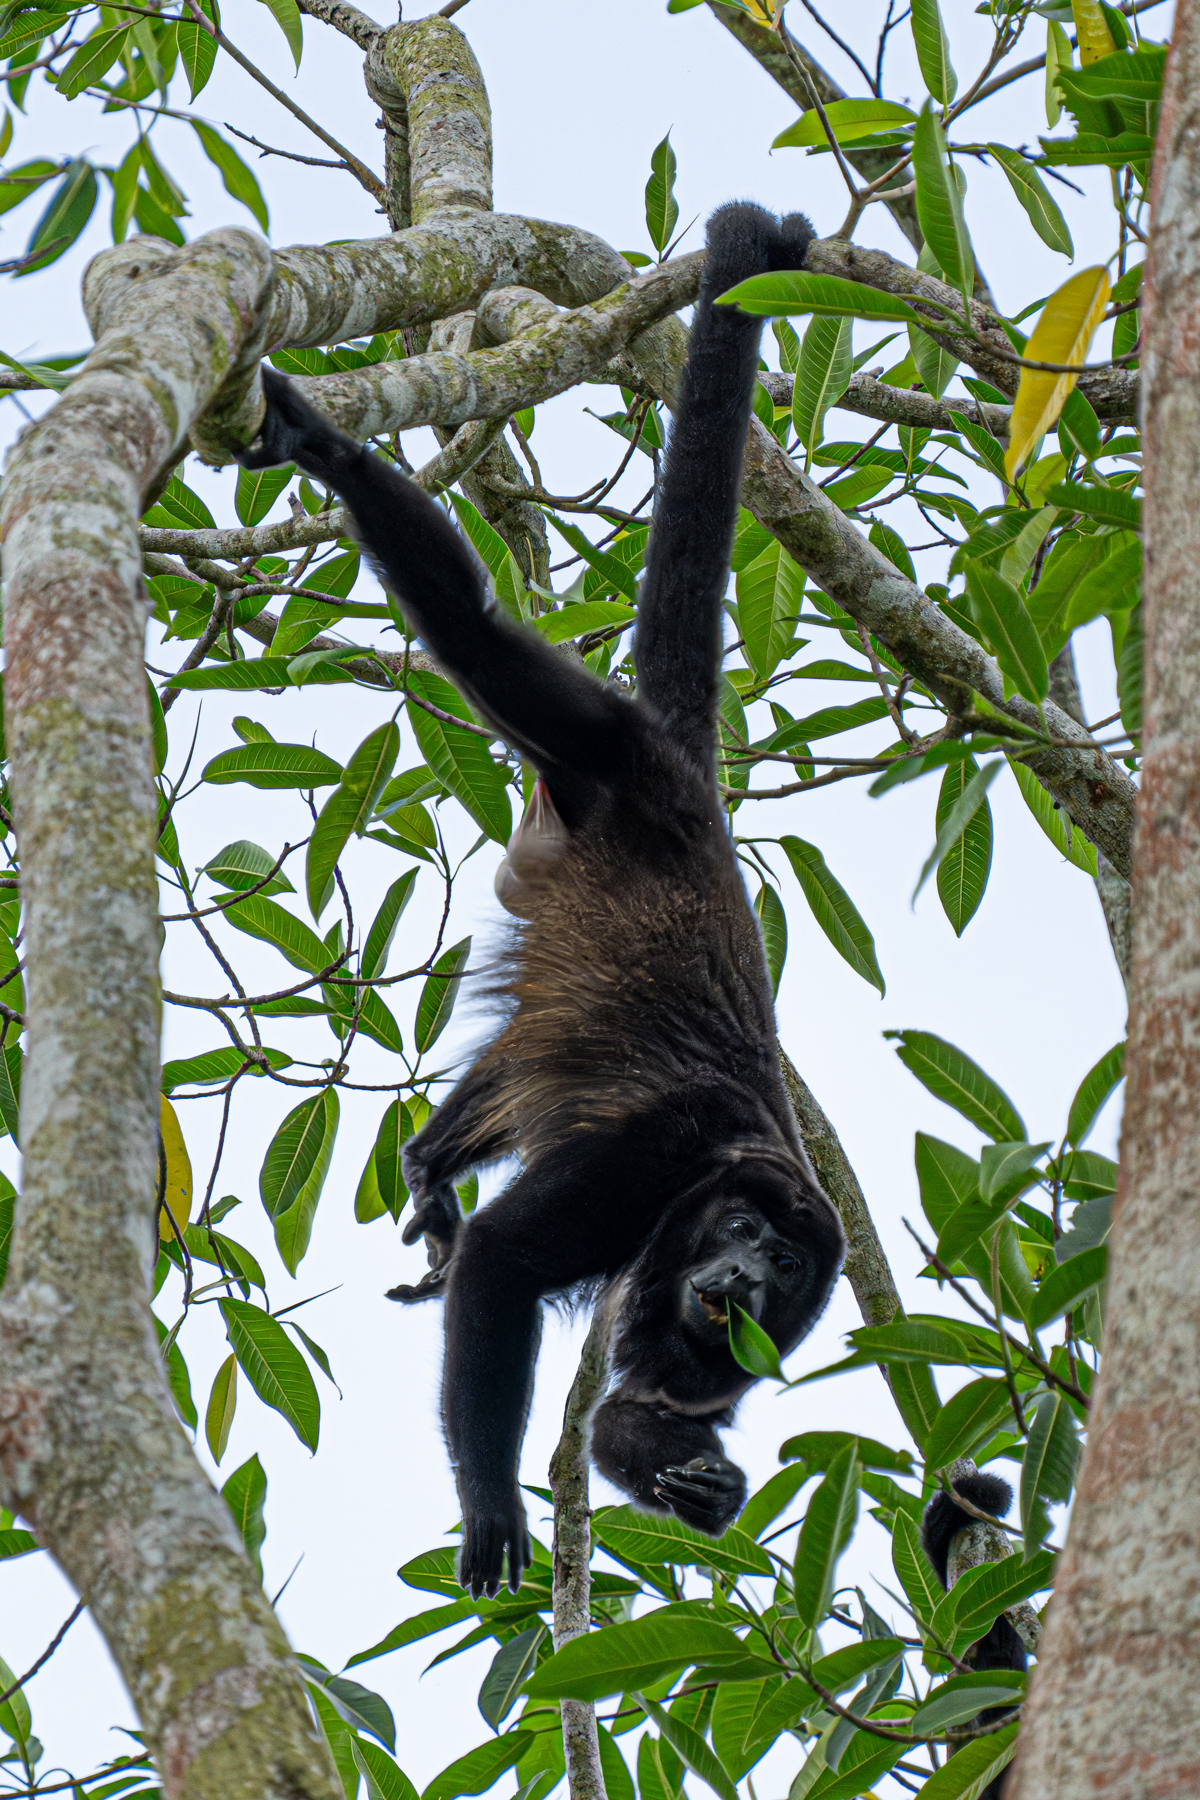 A male Mantled Howler reaches down to snack on leaves (image by Inger Vandyke)